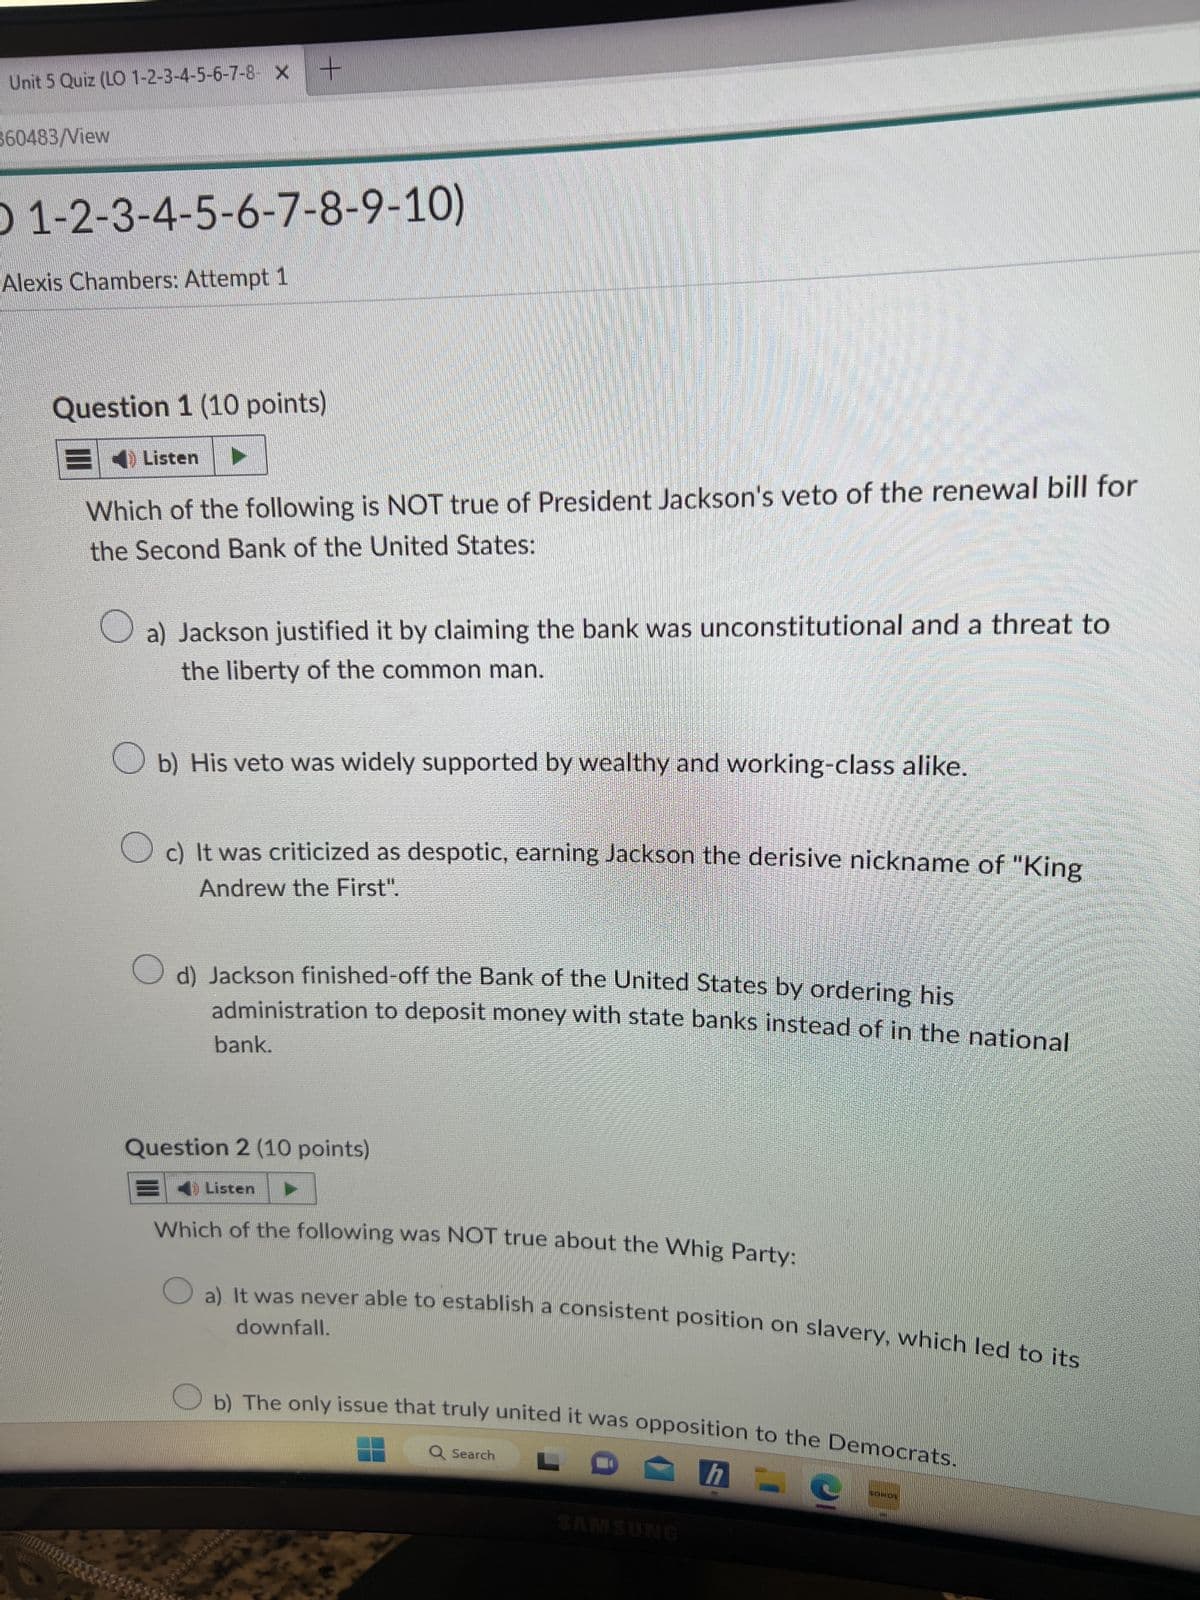 Unit 5 Quiz (LO 1-2-3-4-5-6-7-8- X
360483/View
O 1-2-3-4-5-6-7-8-9-10)
Alexis Chambers: Attempt 1
Question 1 (10 points)
Listen
+
Which of the following is NOT true of President Jackson's veto of the renewal bill for
the Second Bank of the United States:
a) Jackson justified it by claiming the bank was unconstitutional and a threat to
the liberty of the common man.
Ob) His veto was widely supported by wealthy and working-class alike.
c) It was criticized as despotic, earning Jackson the derisive nickname of "King
Andrew the First".
O d) Jackson finished-off the Bank of the United States by ordering his
administration to deposit money with state banks instead of in the national
bank.
Question 2 (10 points)
Listen
Which of the following was NOT true about the Whig Party:
downfall.
It was never able to establish a consistent position on slavery, which led to its
b) The only issue that truly united it was opposition to the Democrats.
LO
h-
Q Search